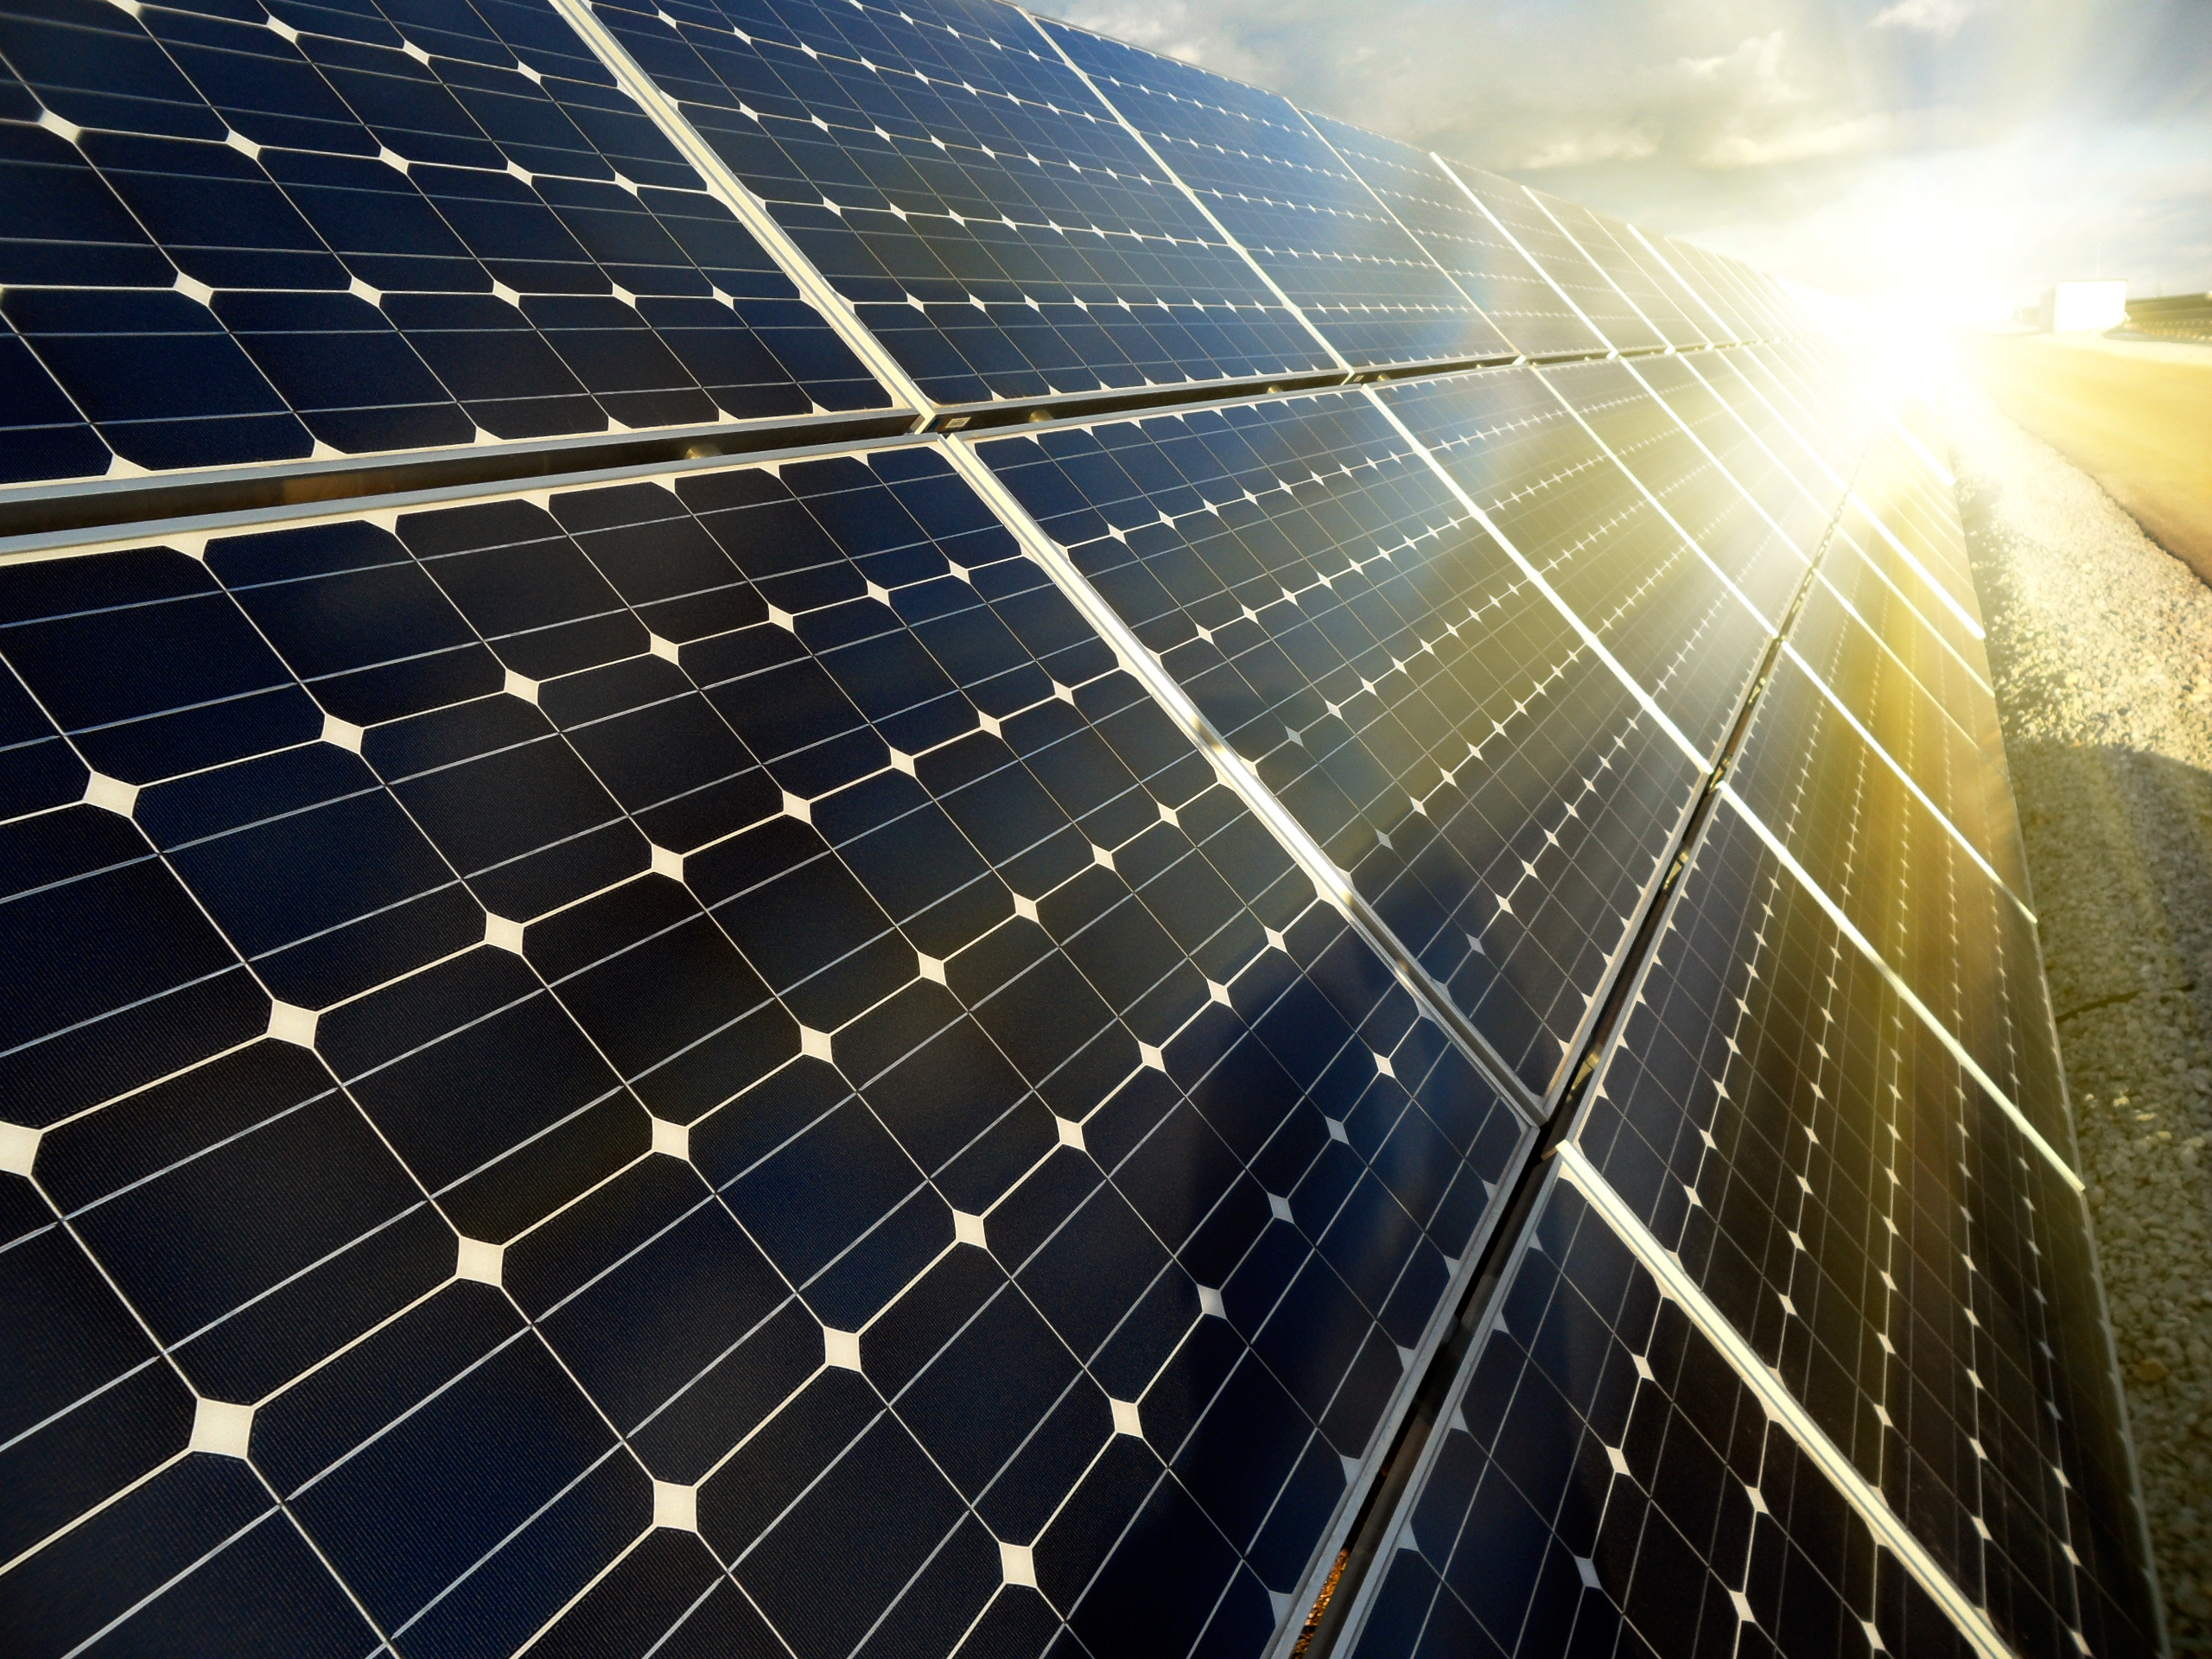 Cameroonian Company To Invest $2 Million In Solar Energy Project